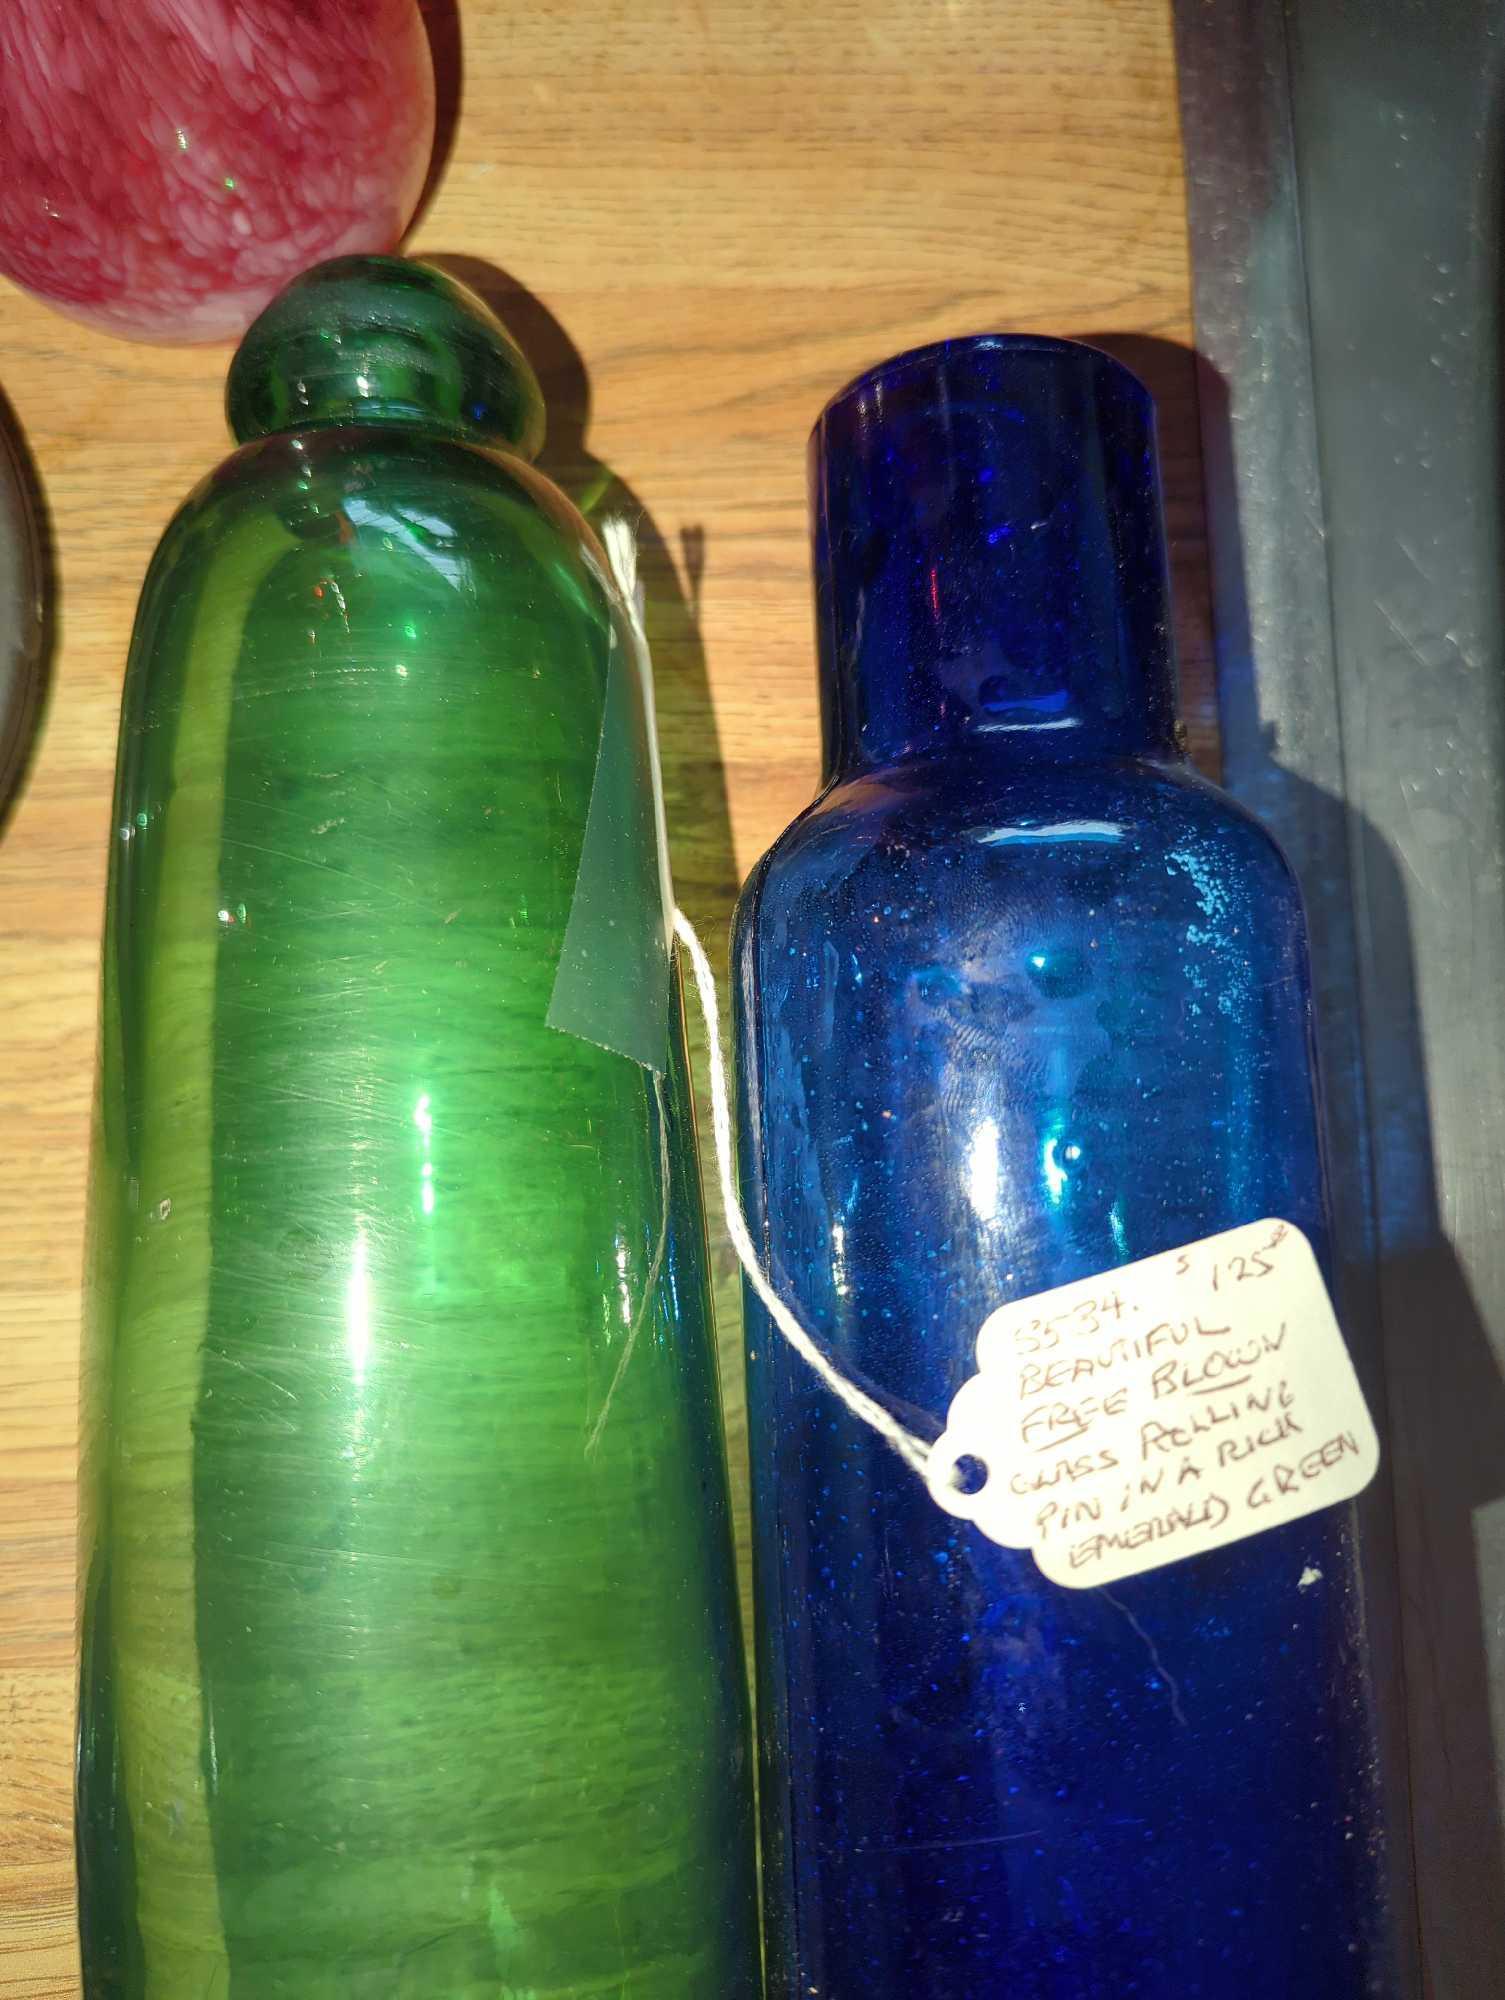 (KIT) LOT OF 2 GLASS BLOWN ROLLING PINS, ONE IS EMERALD GREEN THE OTHER COBALT BLUE GLASS HOLLOW